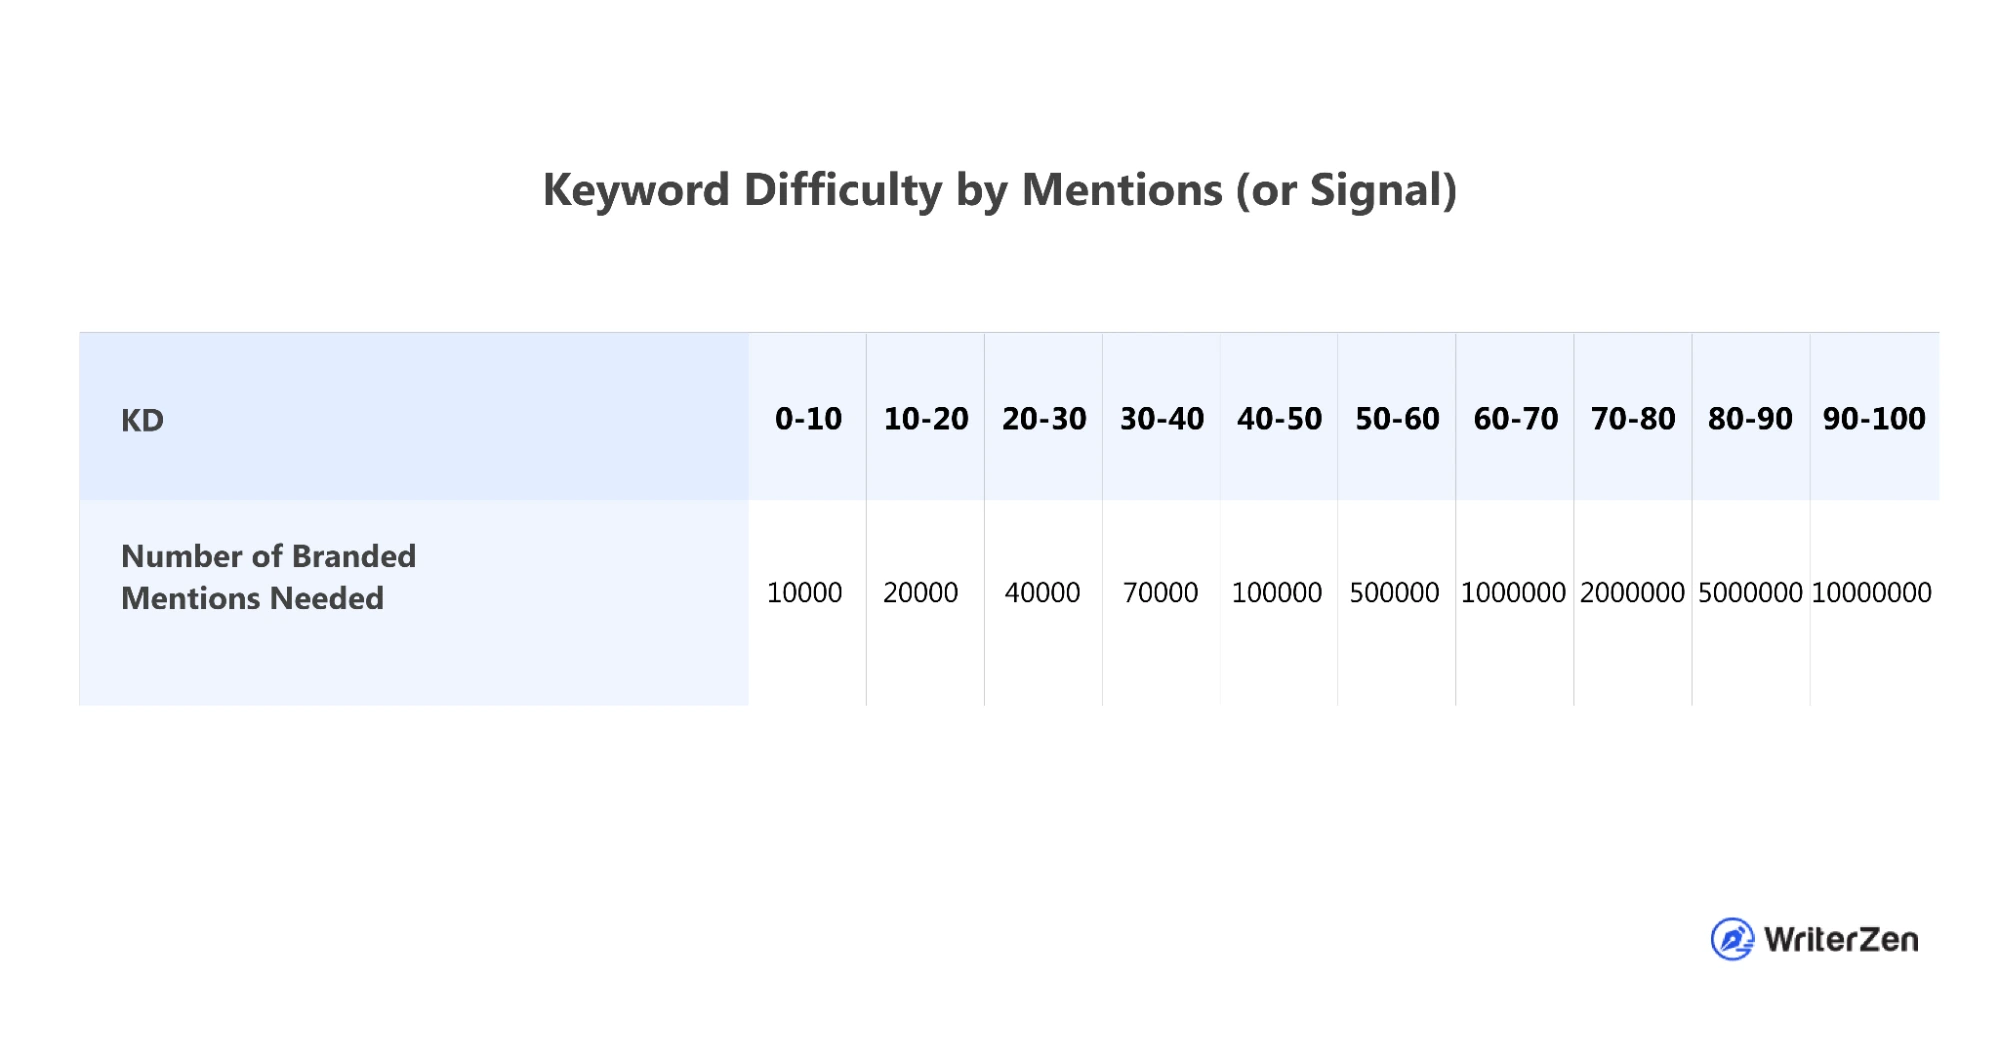 Keyword Difficulty by Mentions (or Signal)